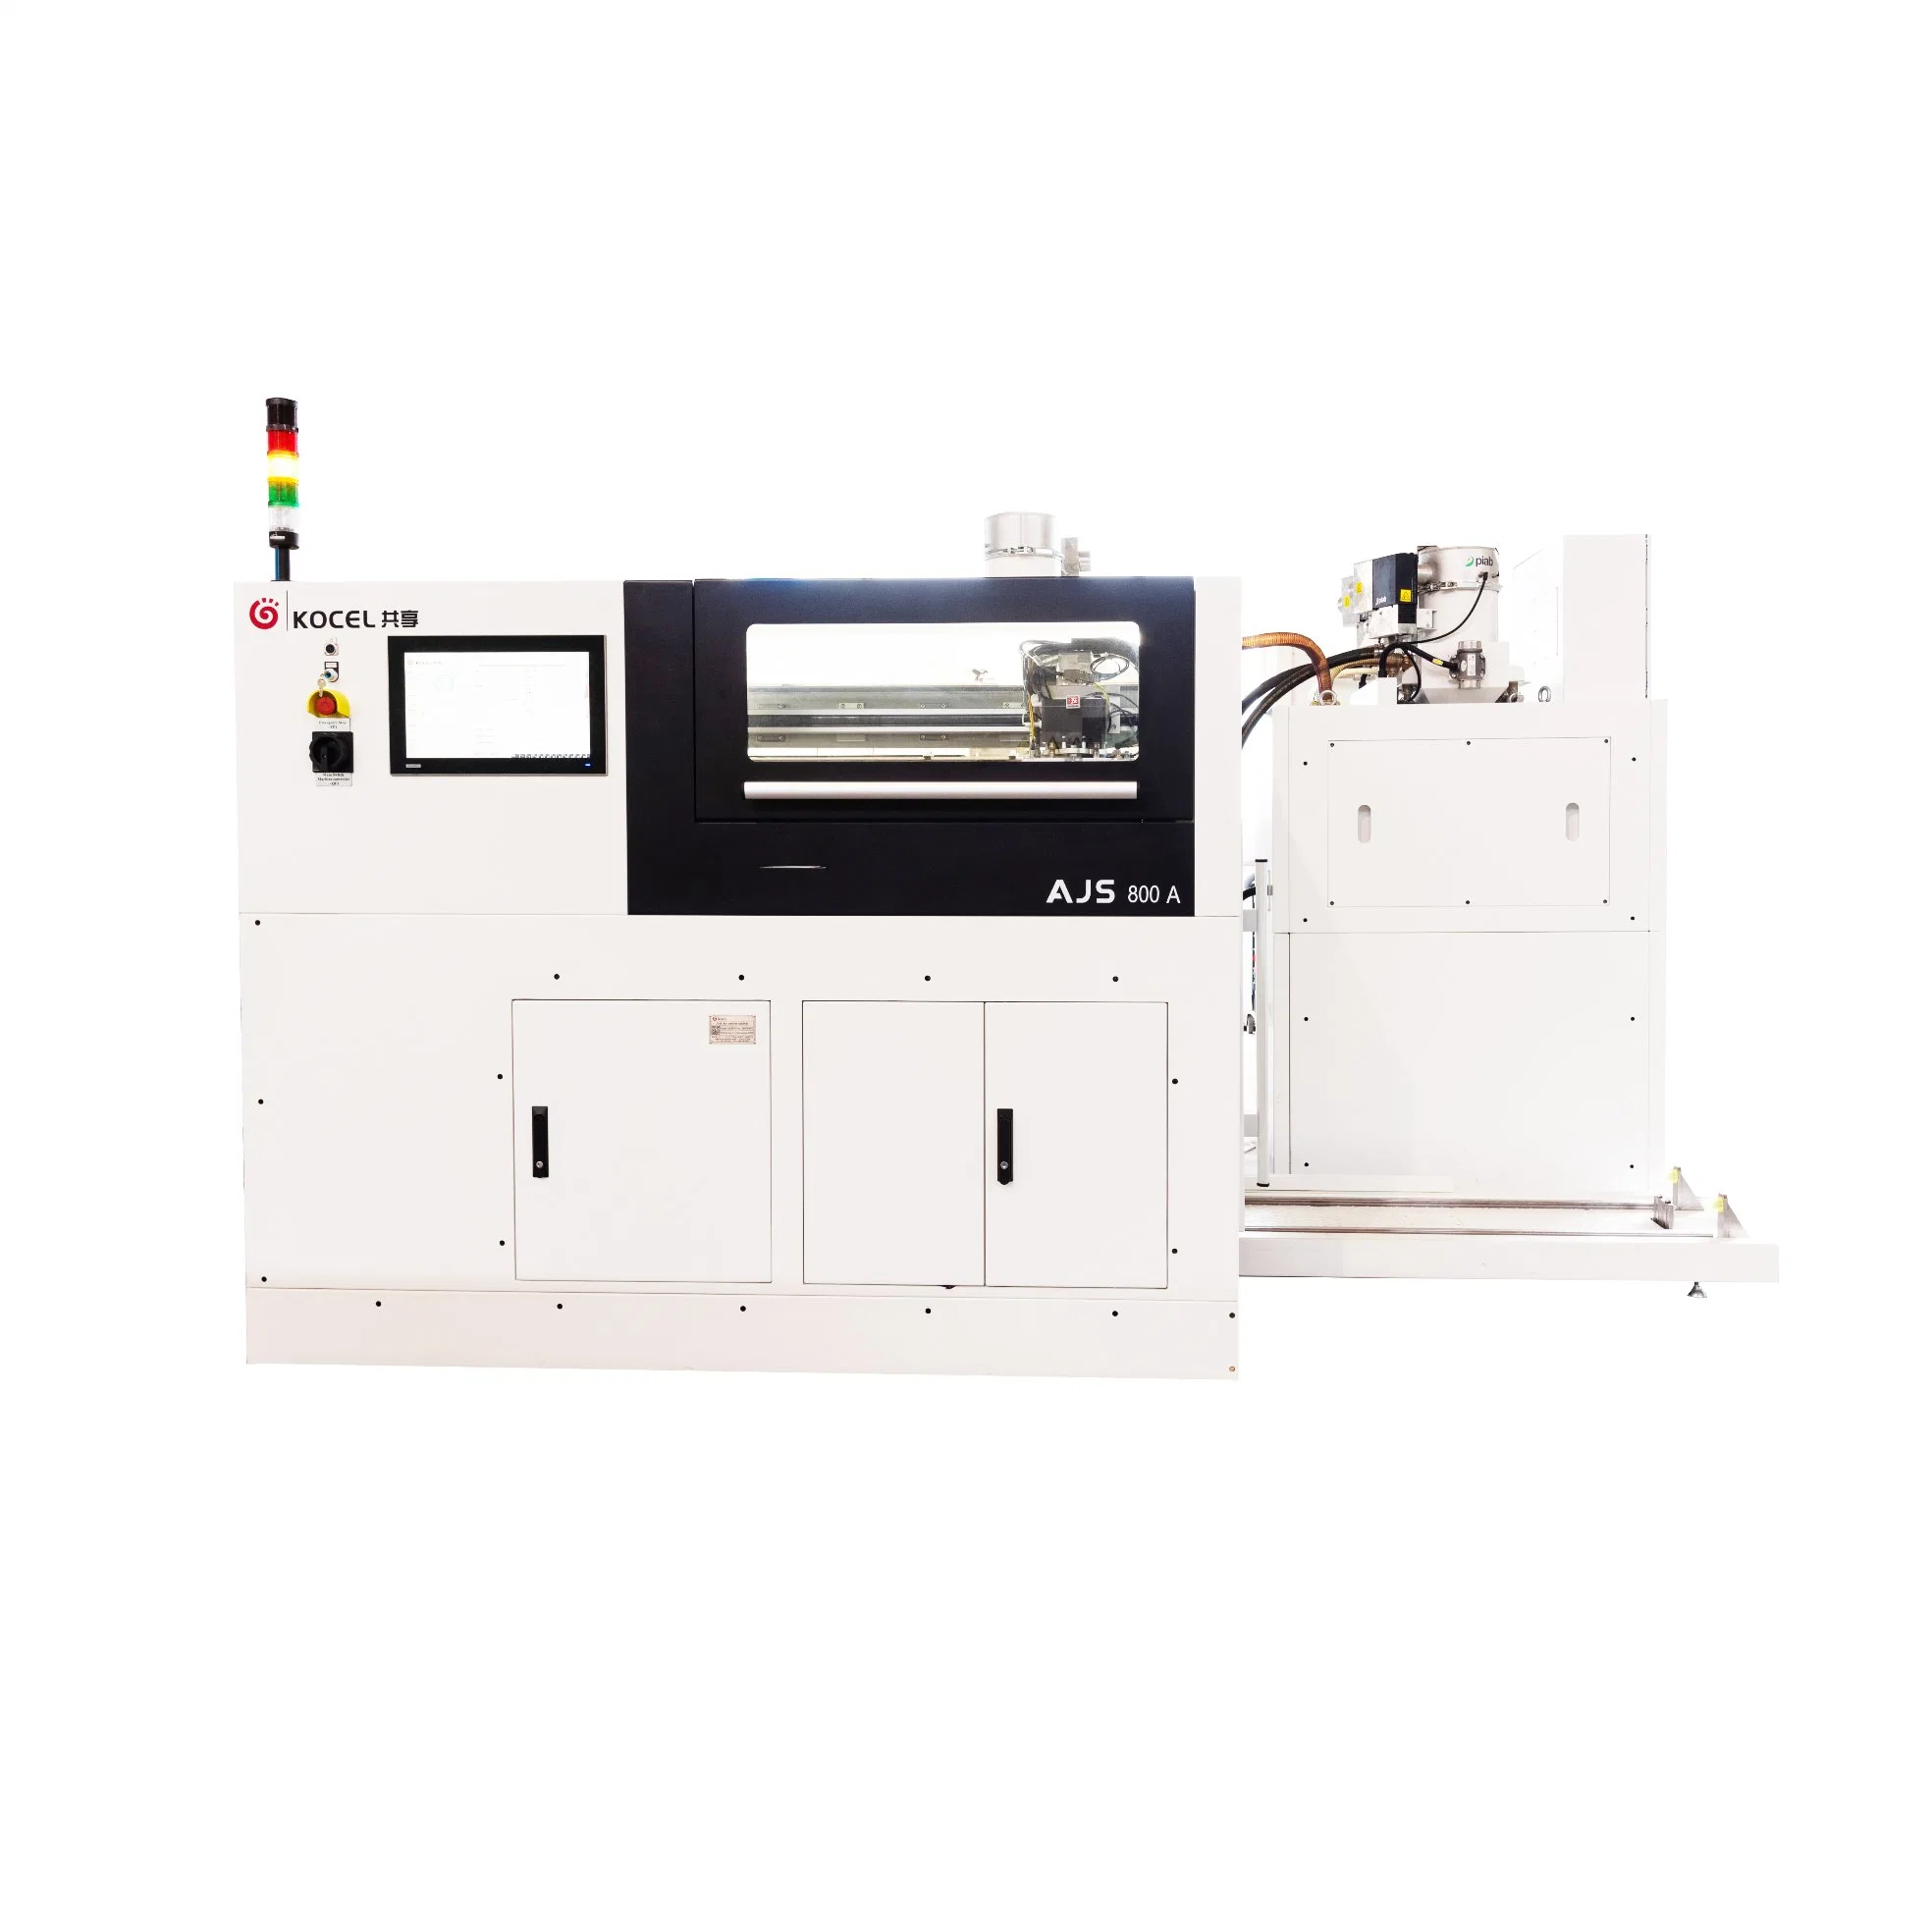 KOCEL AJS 800A High Accuracy Certificated Sand 3D Printer 3DP 3D Printing Machine for Rapid Prototyping